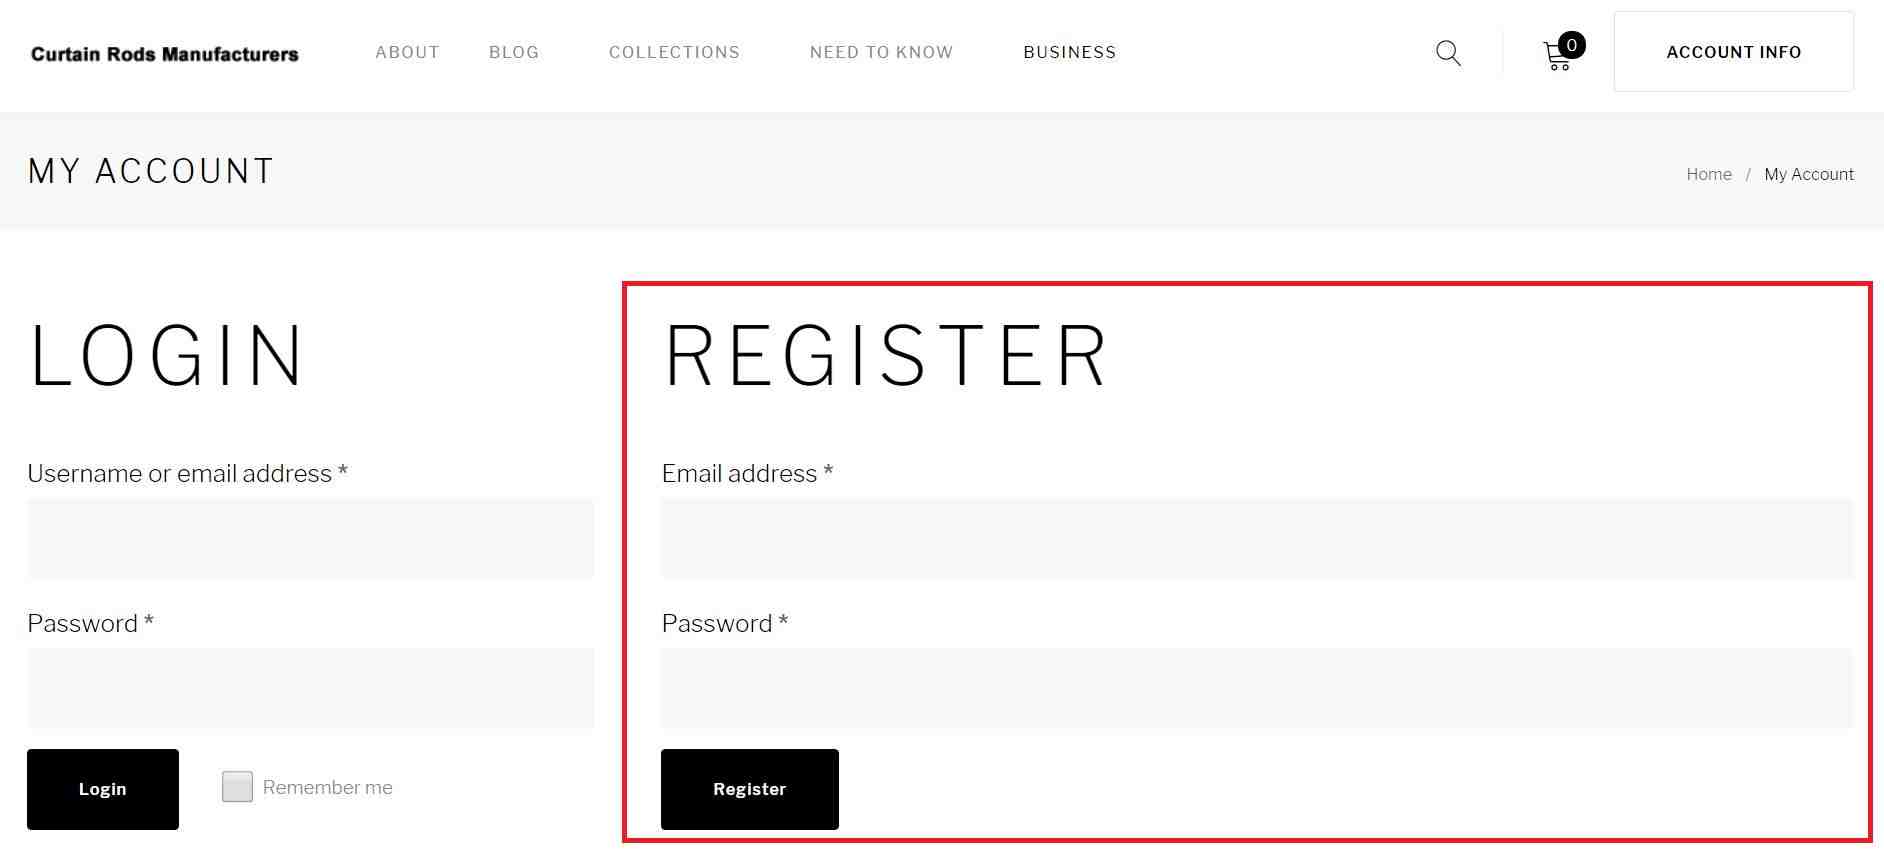 Please provide your email and setup your passwords for registration